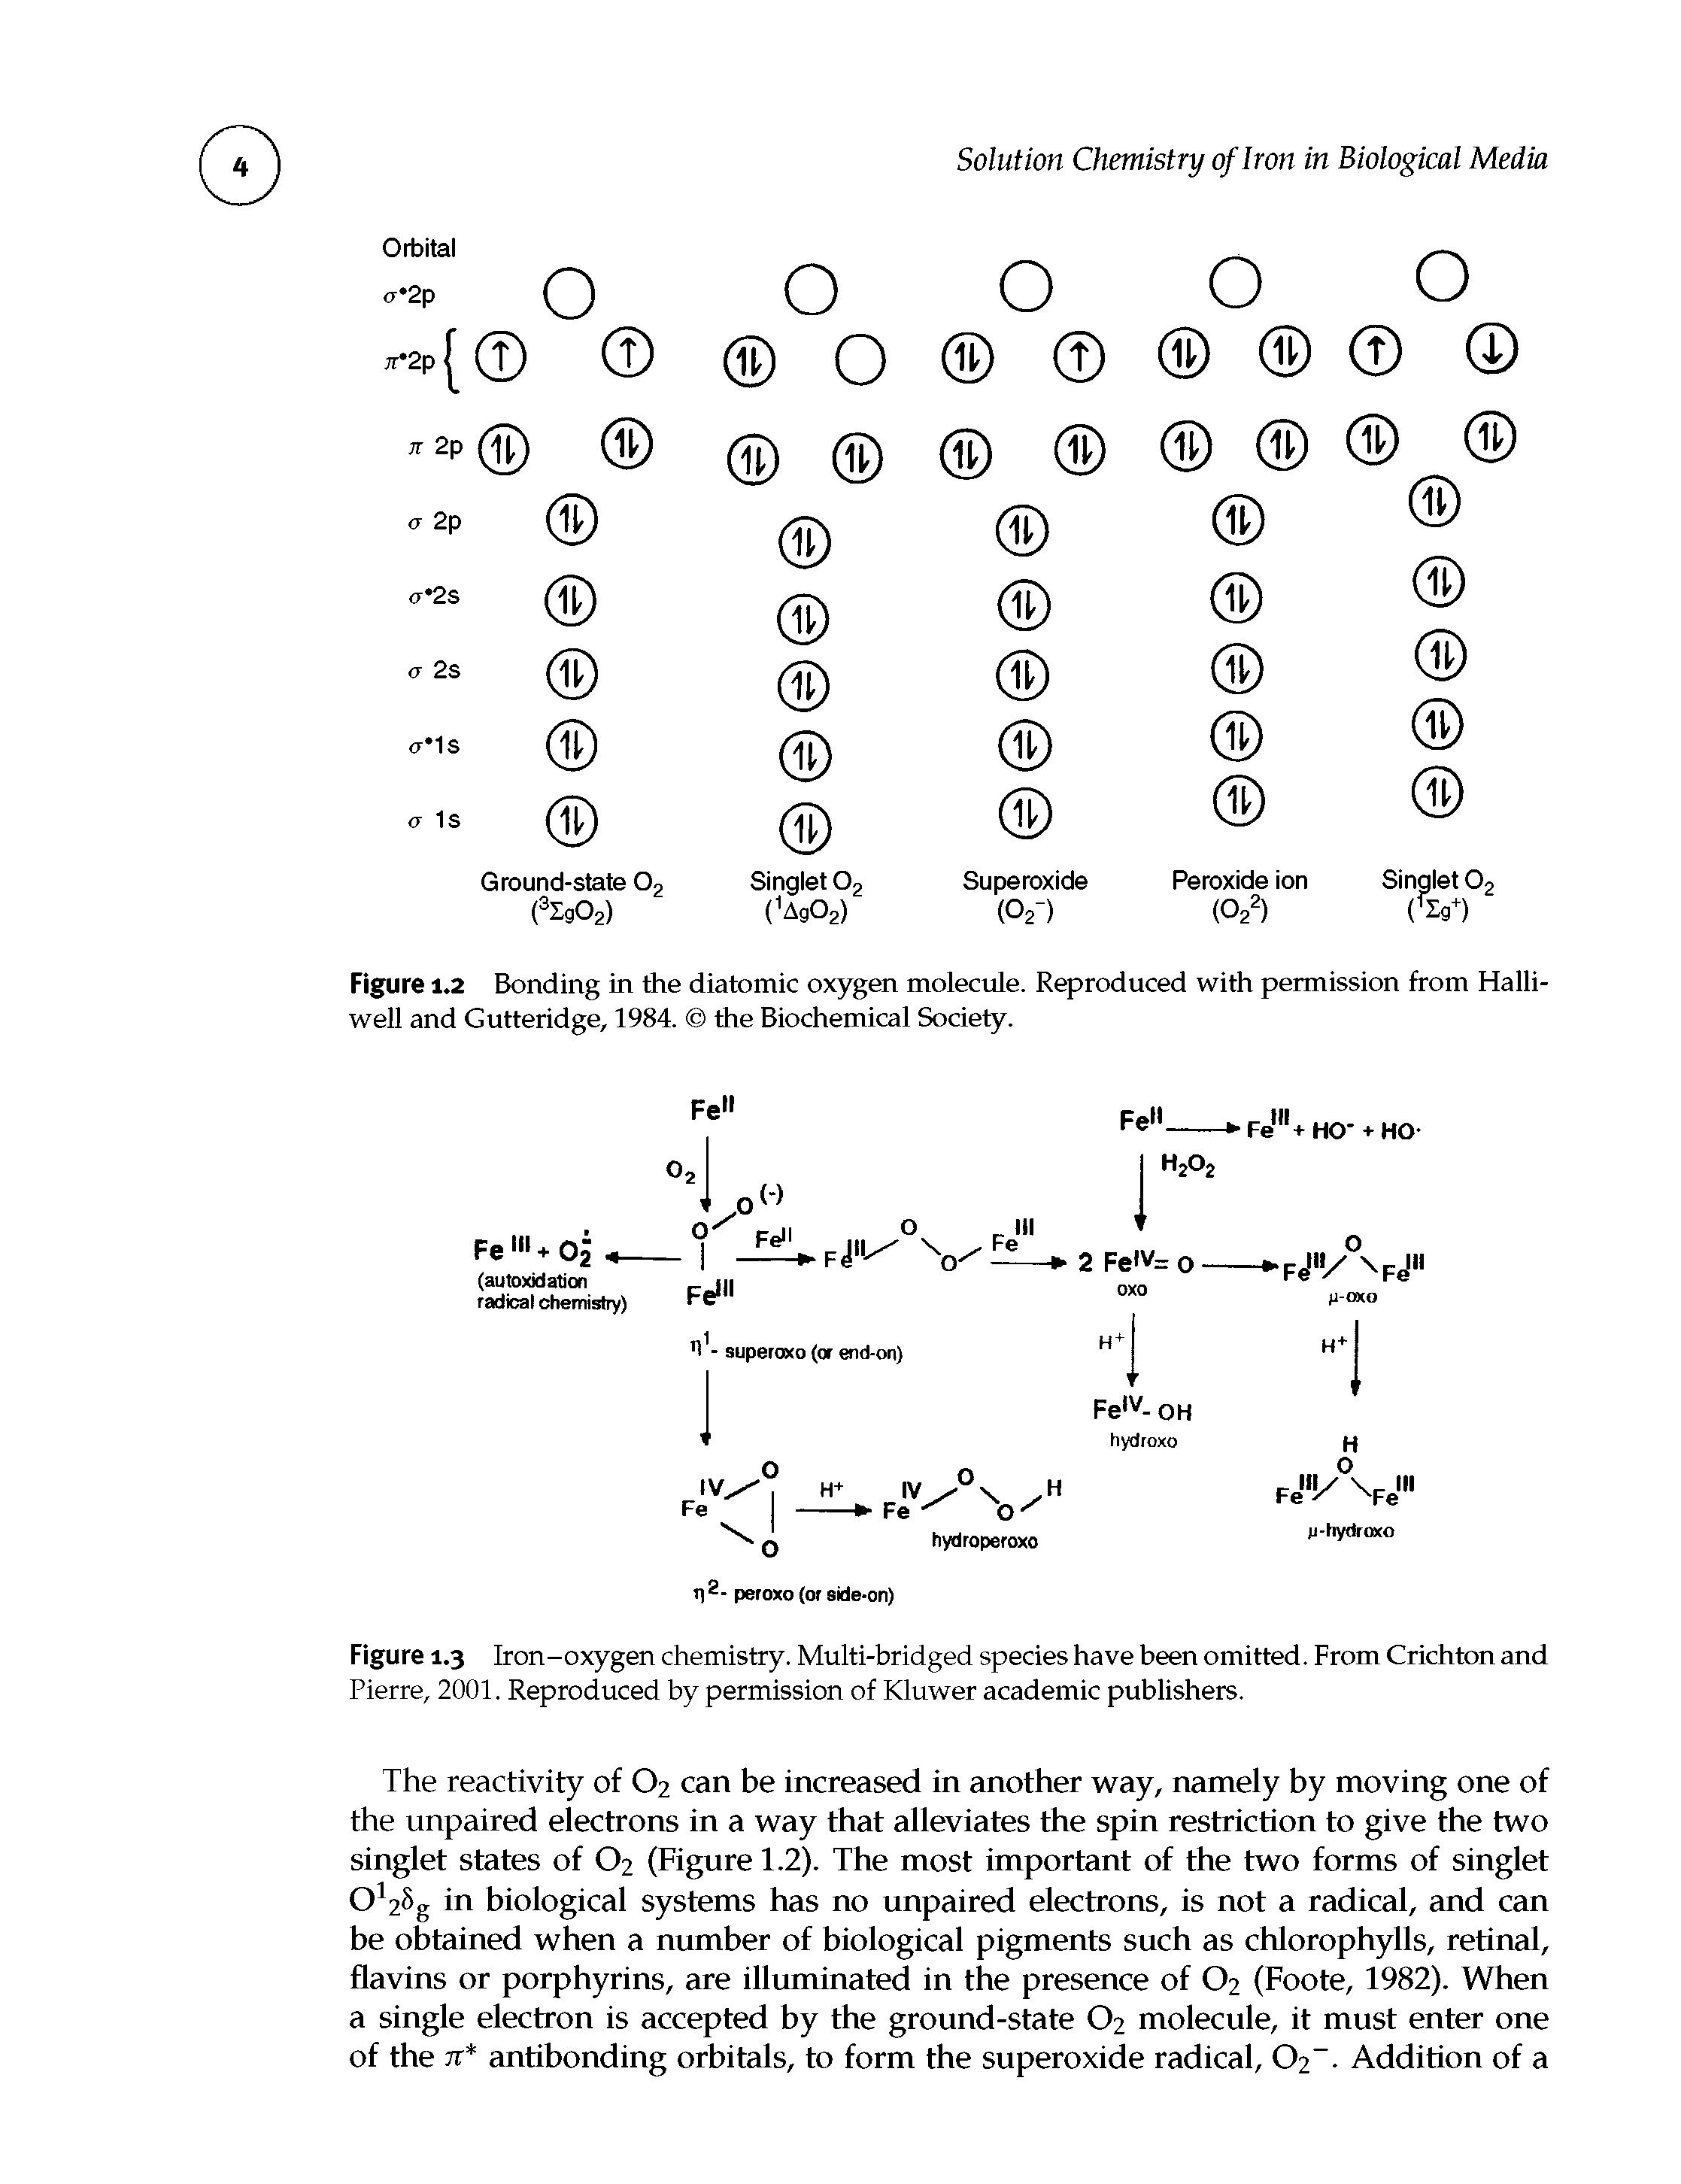 Figure 1.2 Bonding in the diatomic oxygen molecule. Reproduced with permission from Halli-well and Gutteridge, 1984. the Biochemical Society.